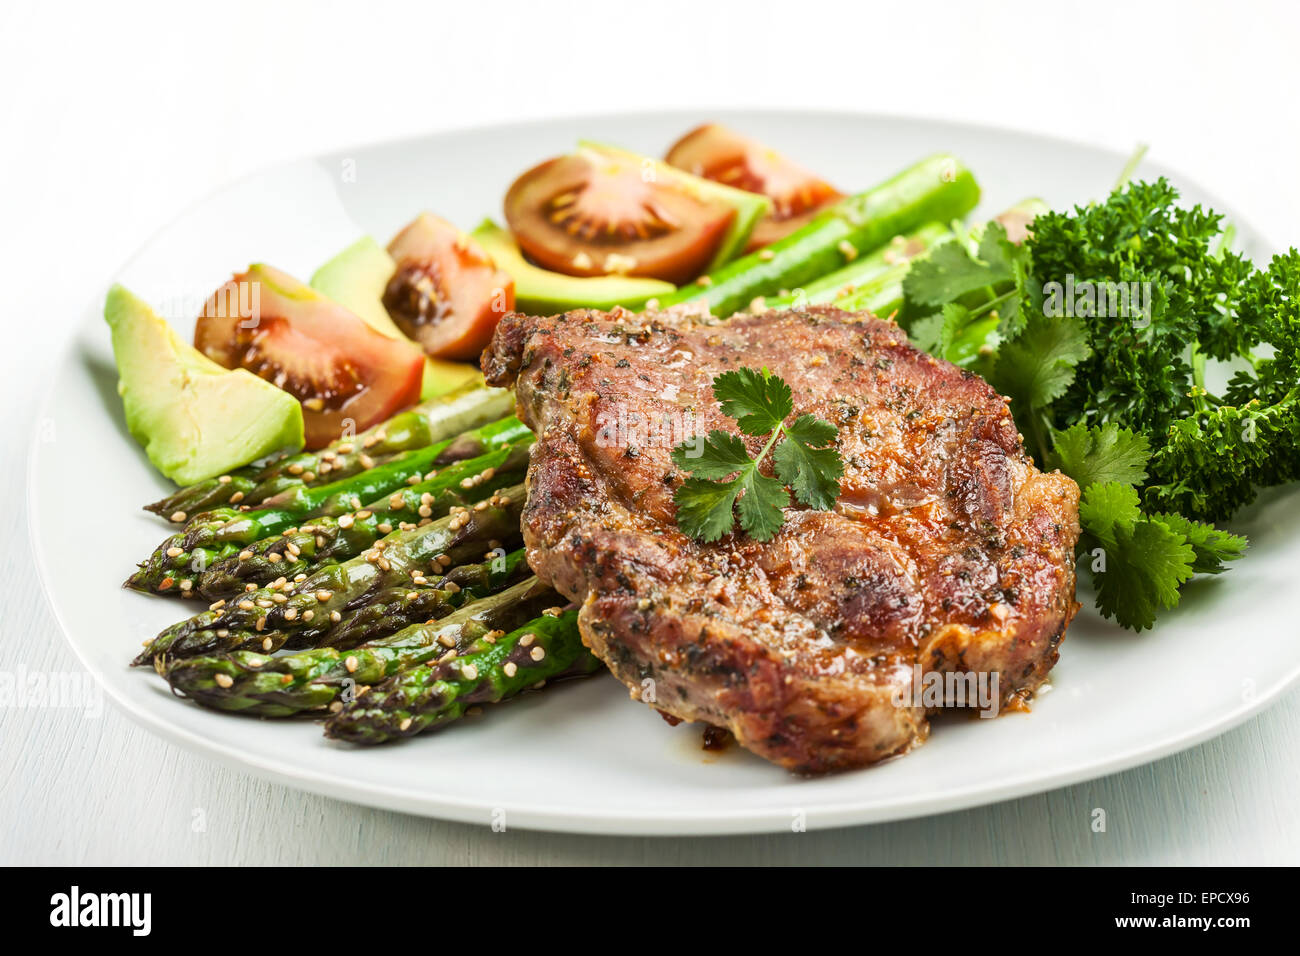 Glazed green asparagus with sesame seeds and grilled pork chop Stock Photo